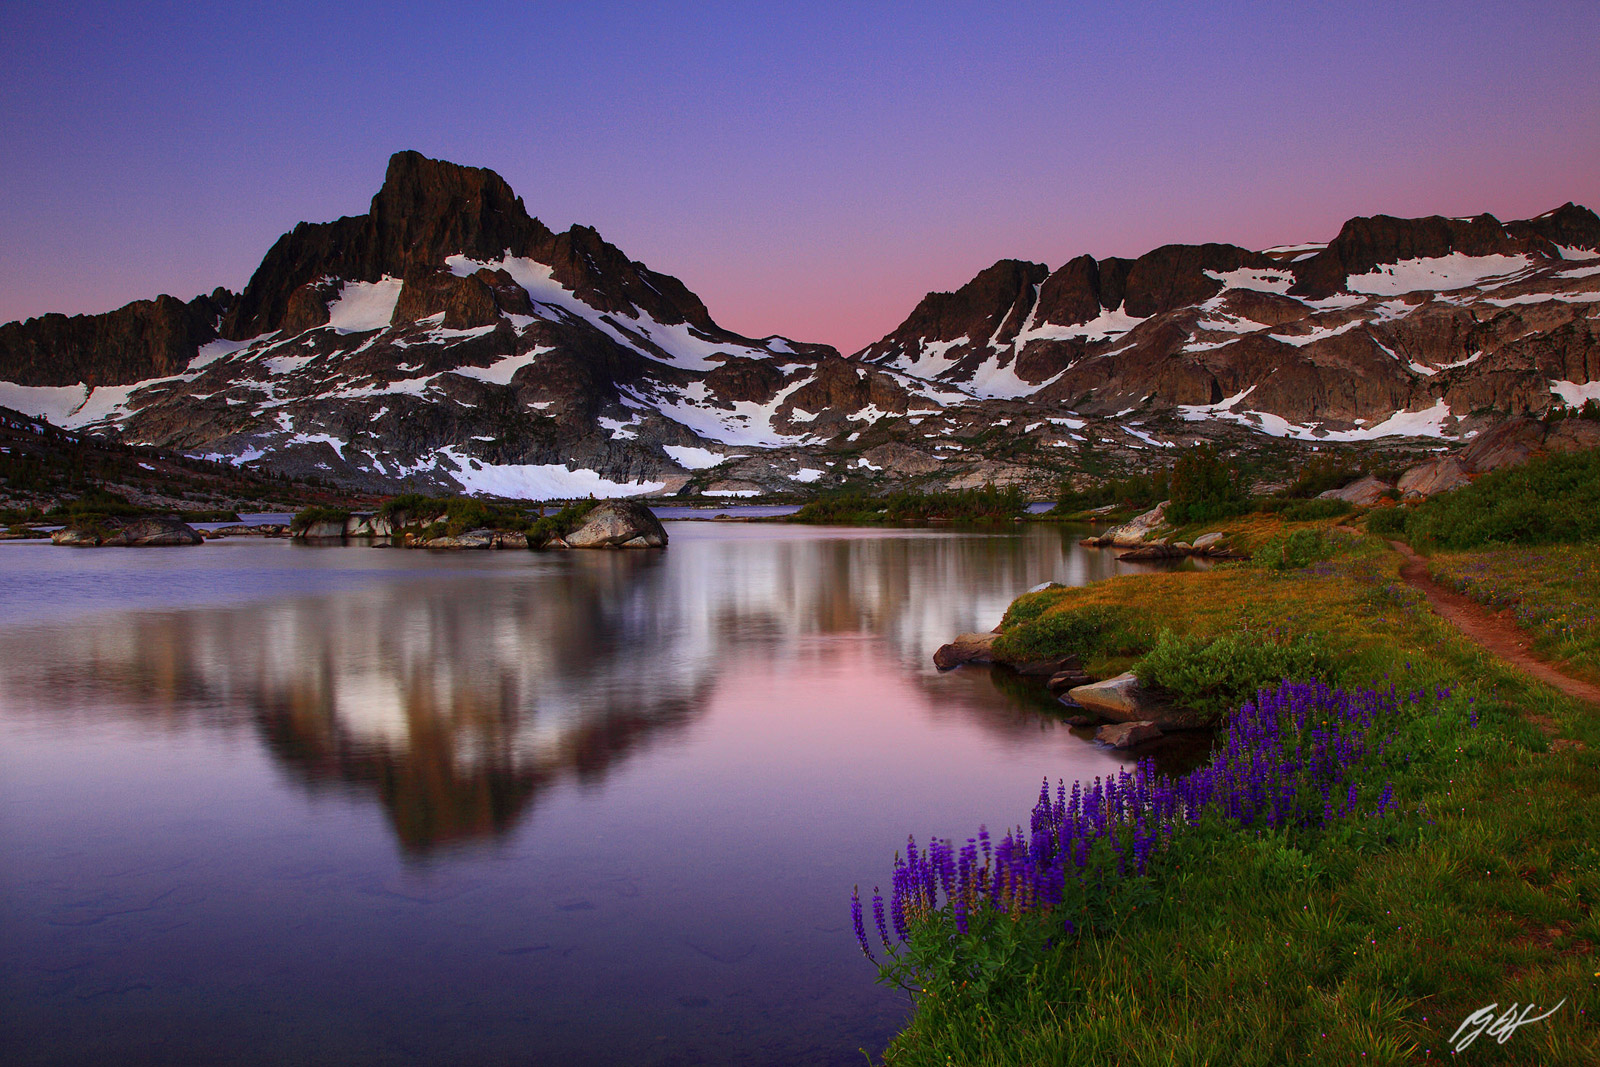 Banner Peak Reflected in Thousand Island Lake in the Ansel Adams Wilderness in California